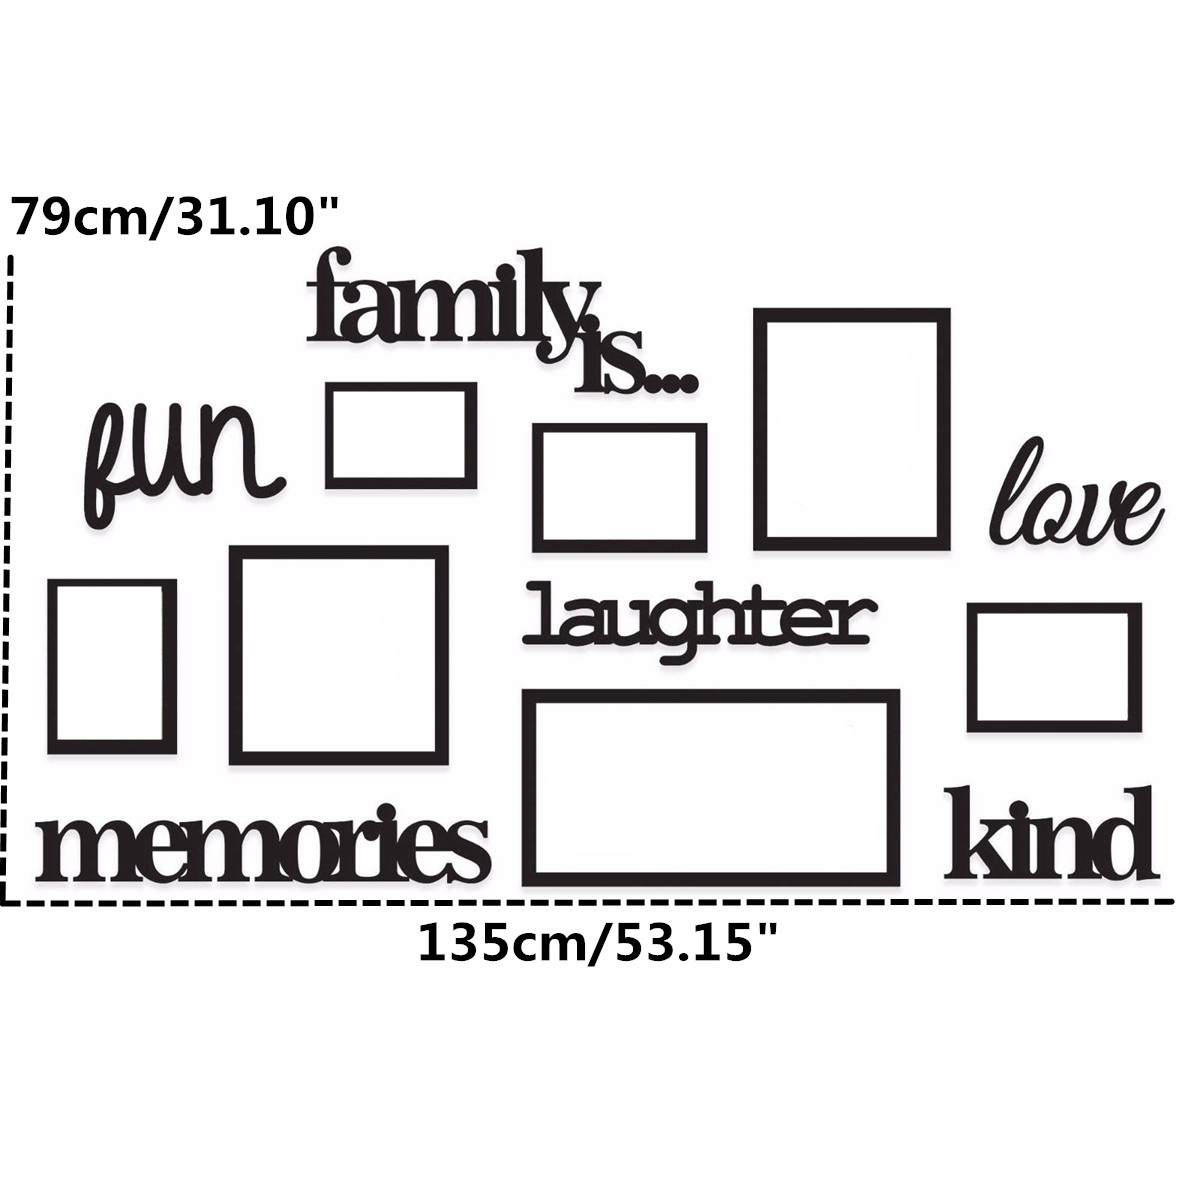 13PcsSet-Family-Photo-Frame-Home-Hanging-Wall-Decorative-Collage-Decoration-Wedding-Picture-Sticker-1463236